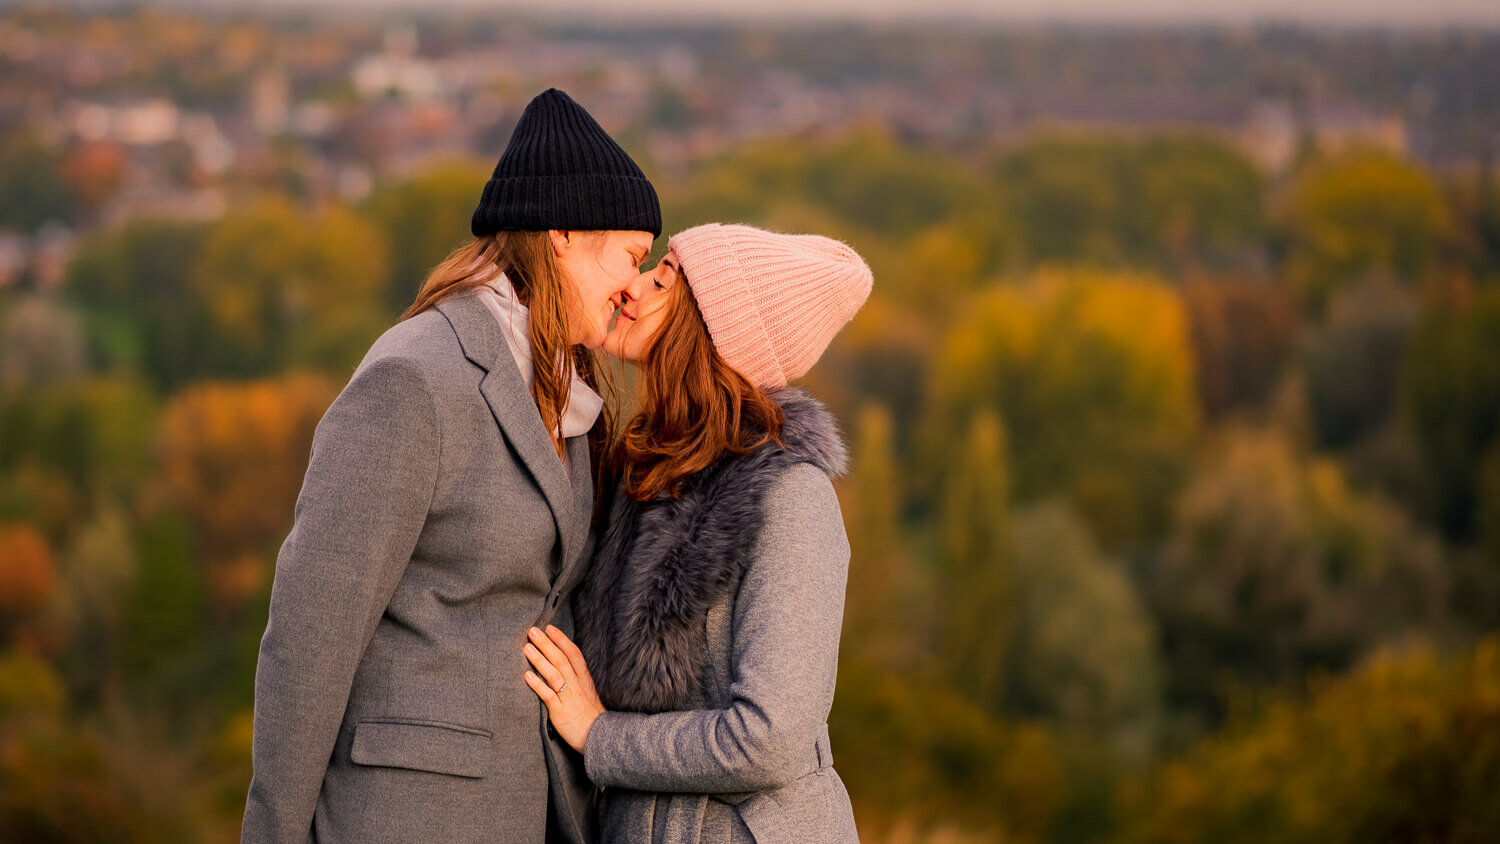 Romantic image of two women engaged